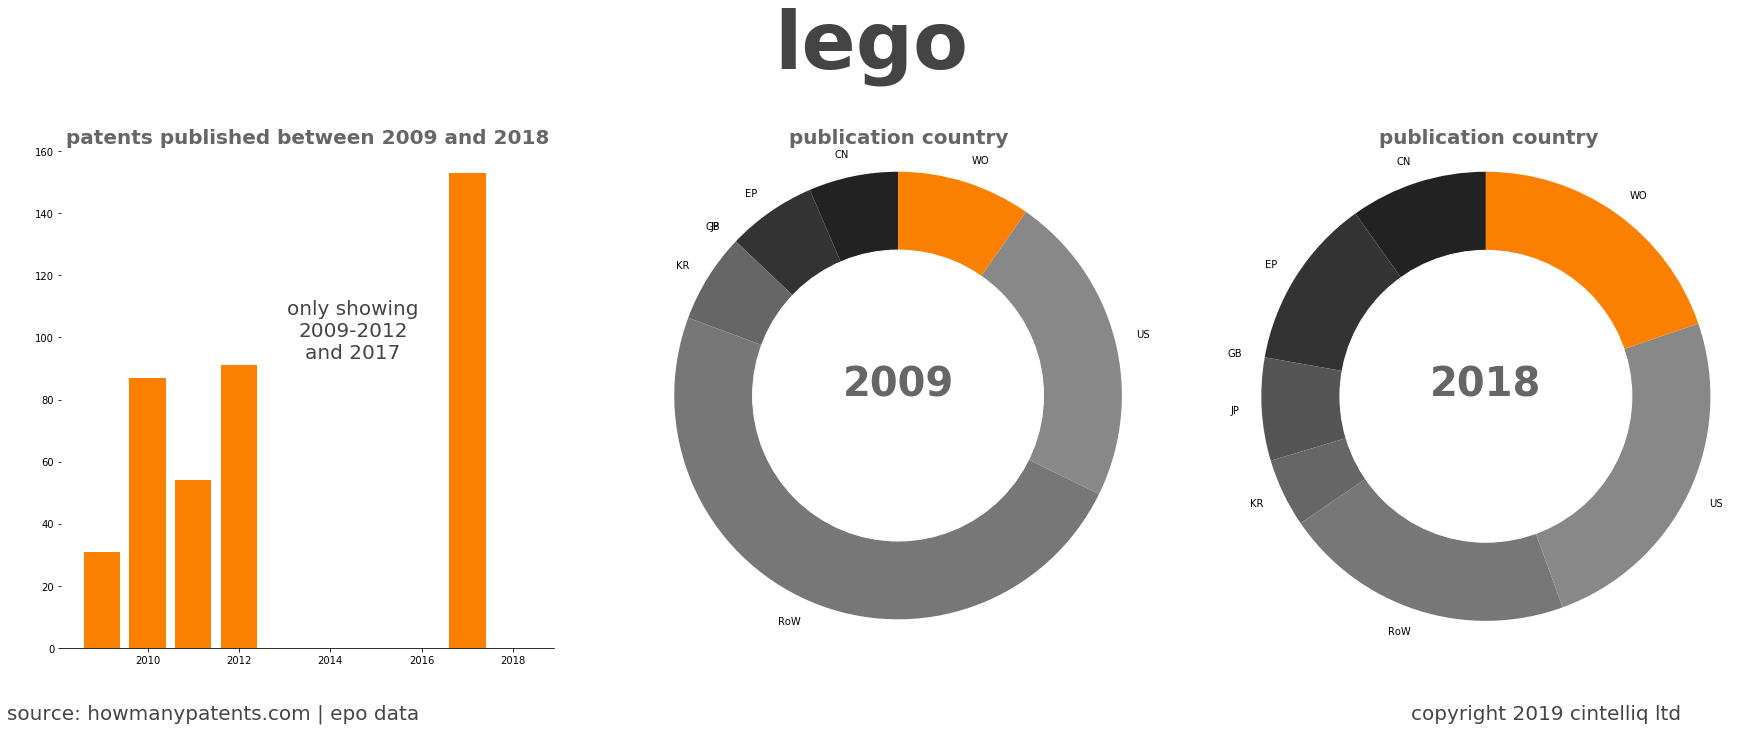 summary of patents for Lego